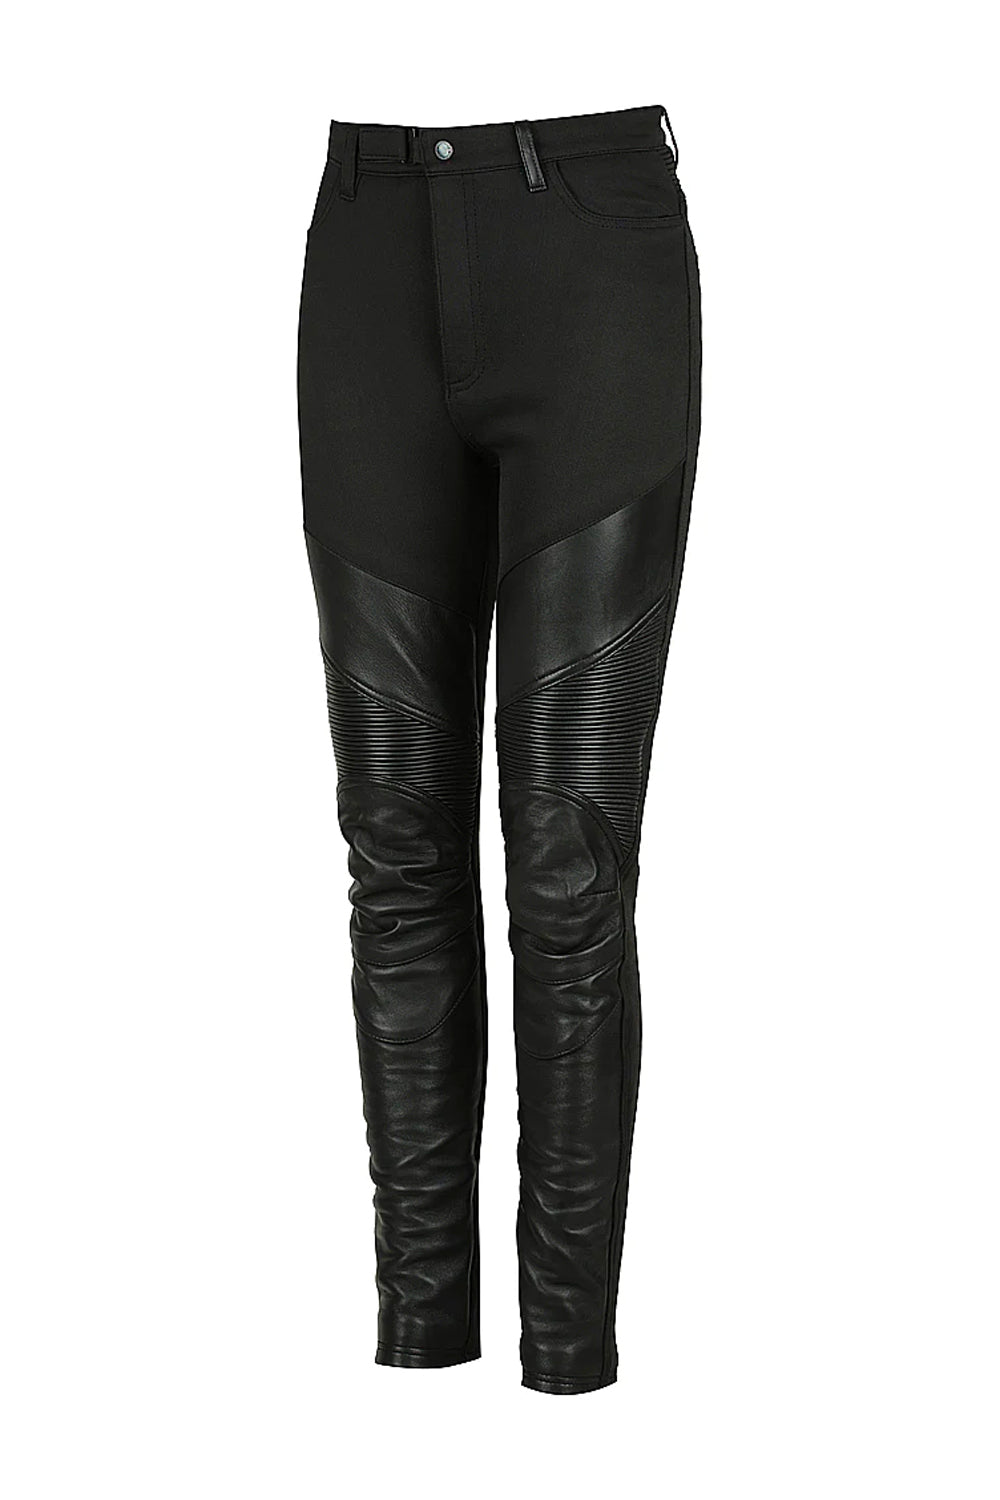 The new GoGo Gear Kevlar Leggings, ready for pre-order! Get it at